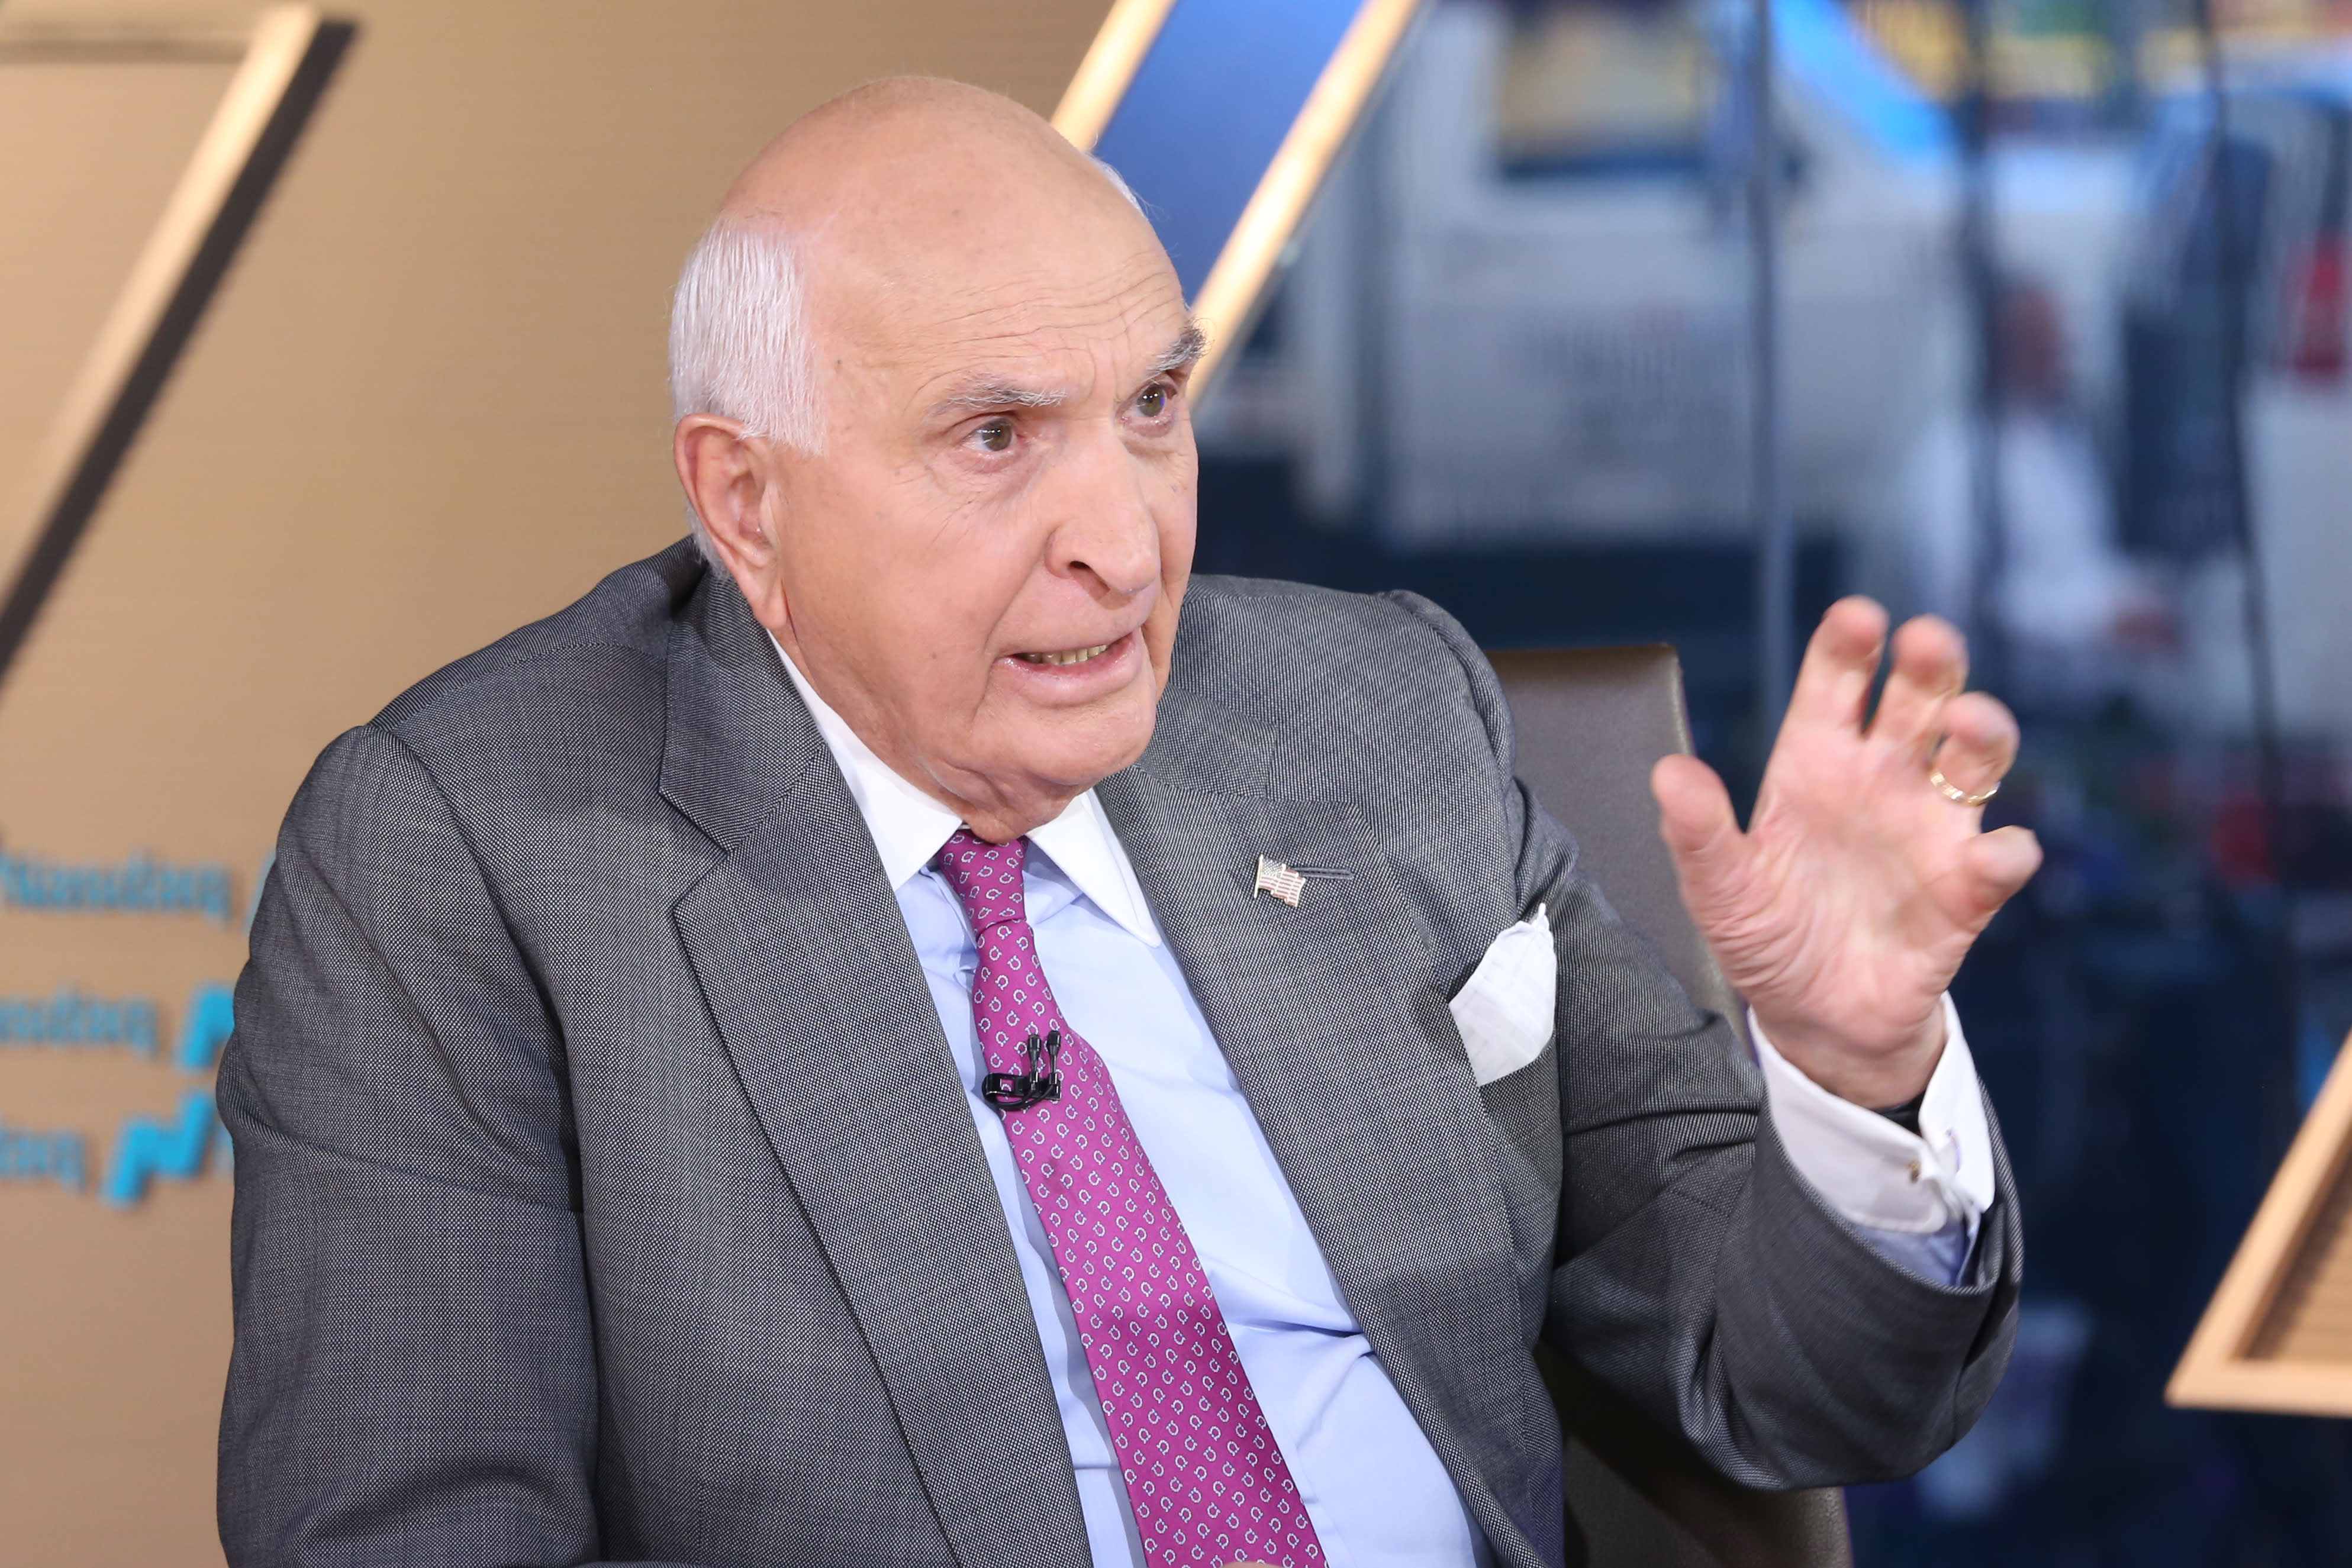 'I feel betrayed' — Ken Langone blasts Trump and Capitol rioters, vows to support Biden